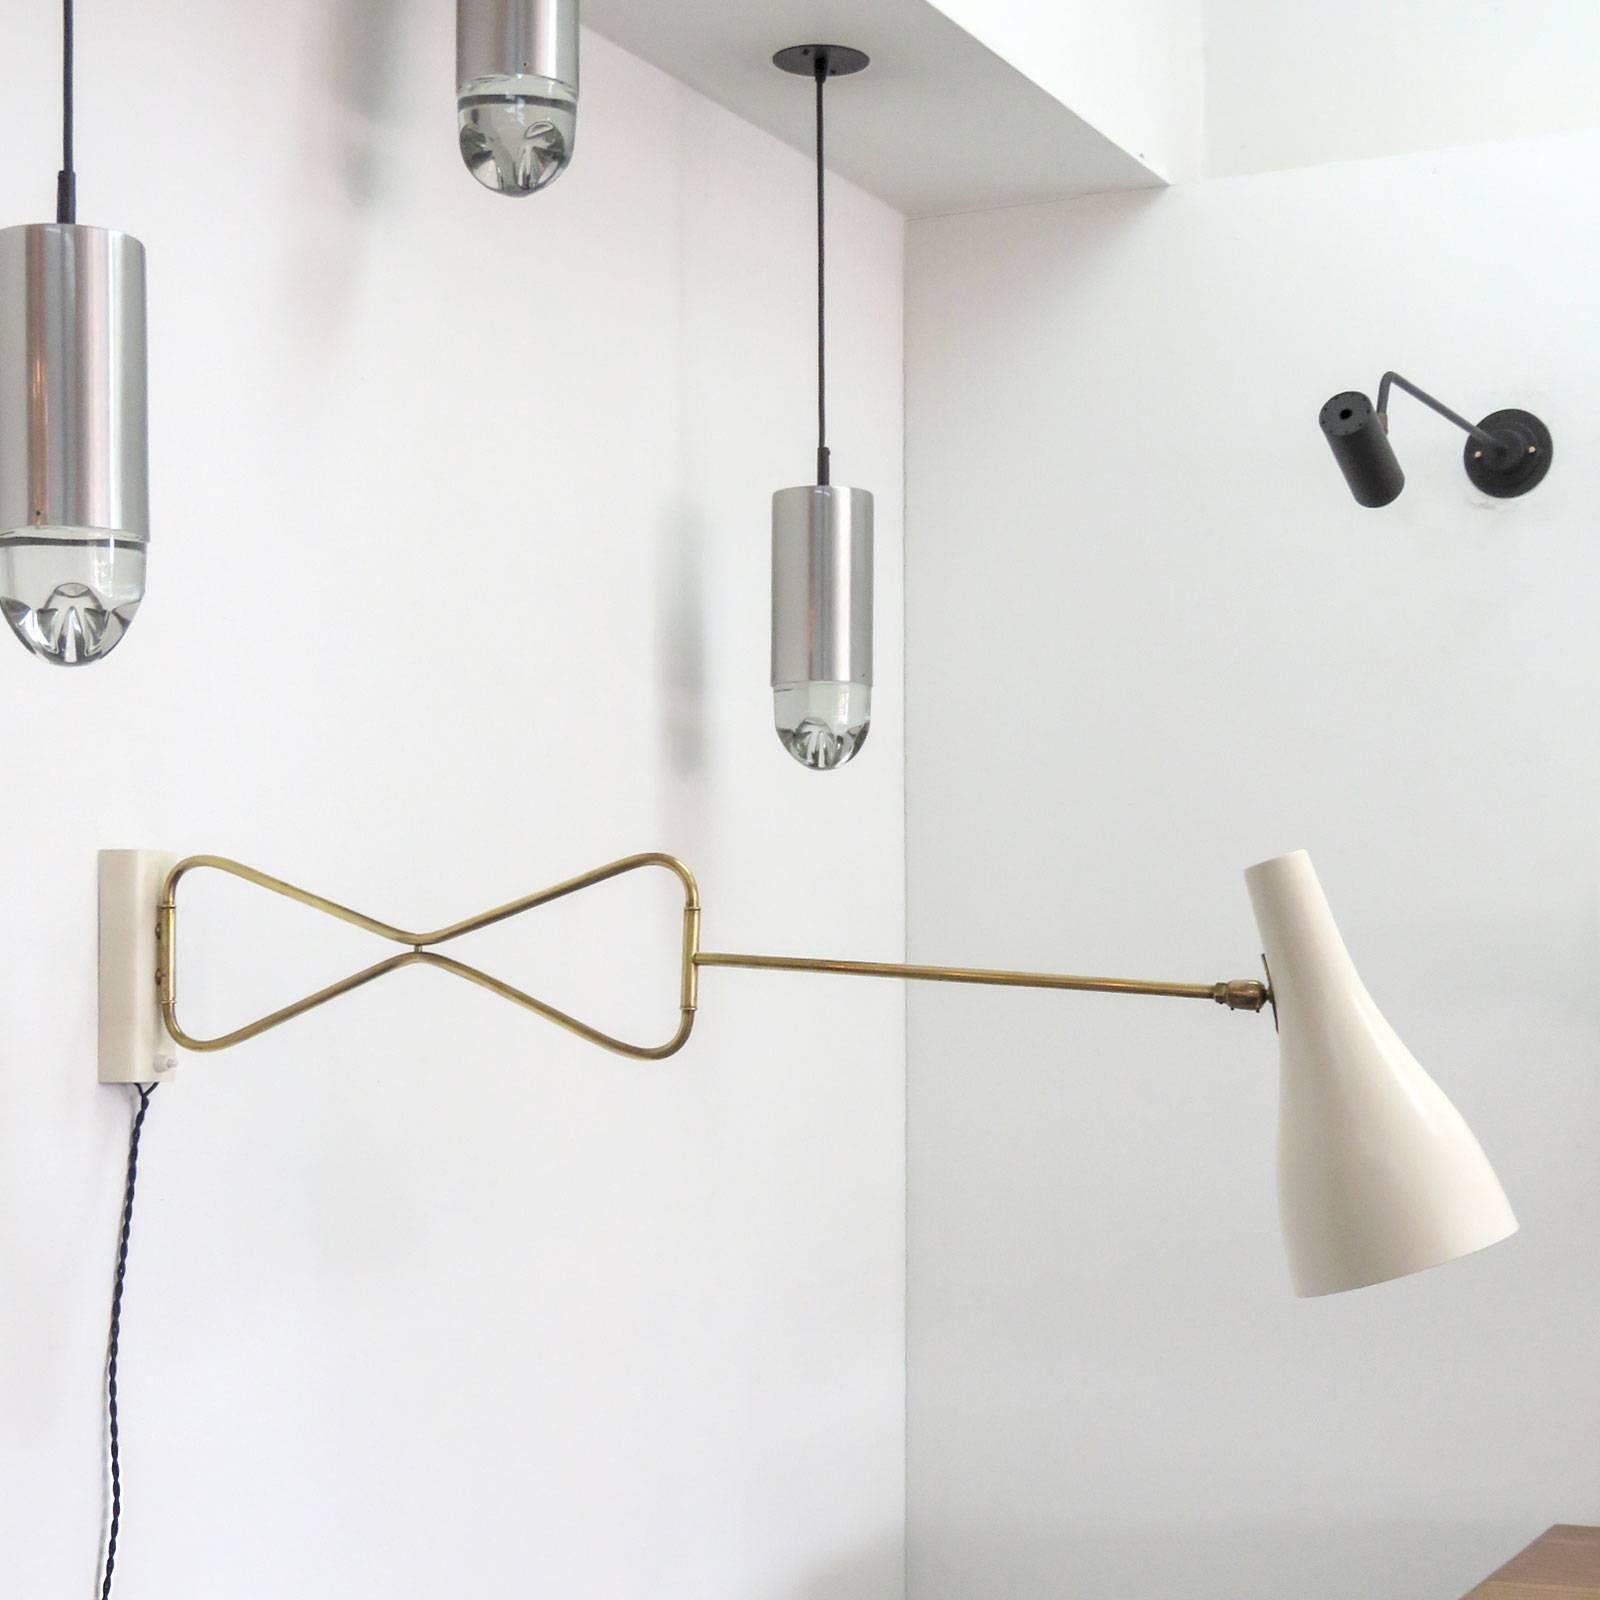 Elegant Austrian double-fold swing arm sconce in brass and enameled metal, egg shell white, currently corded, can be hardwired.